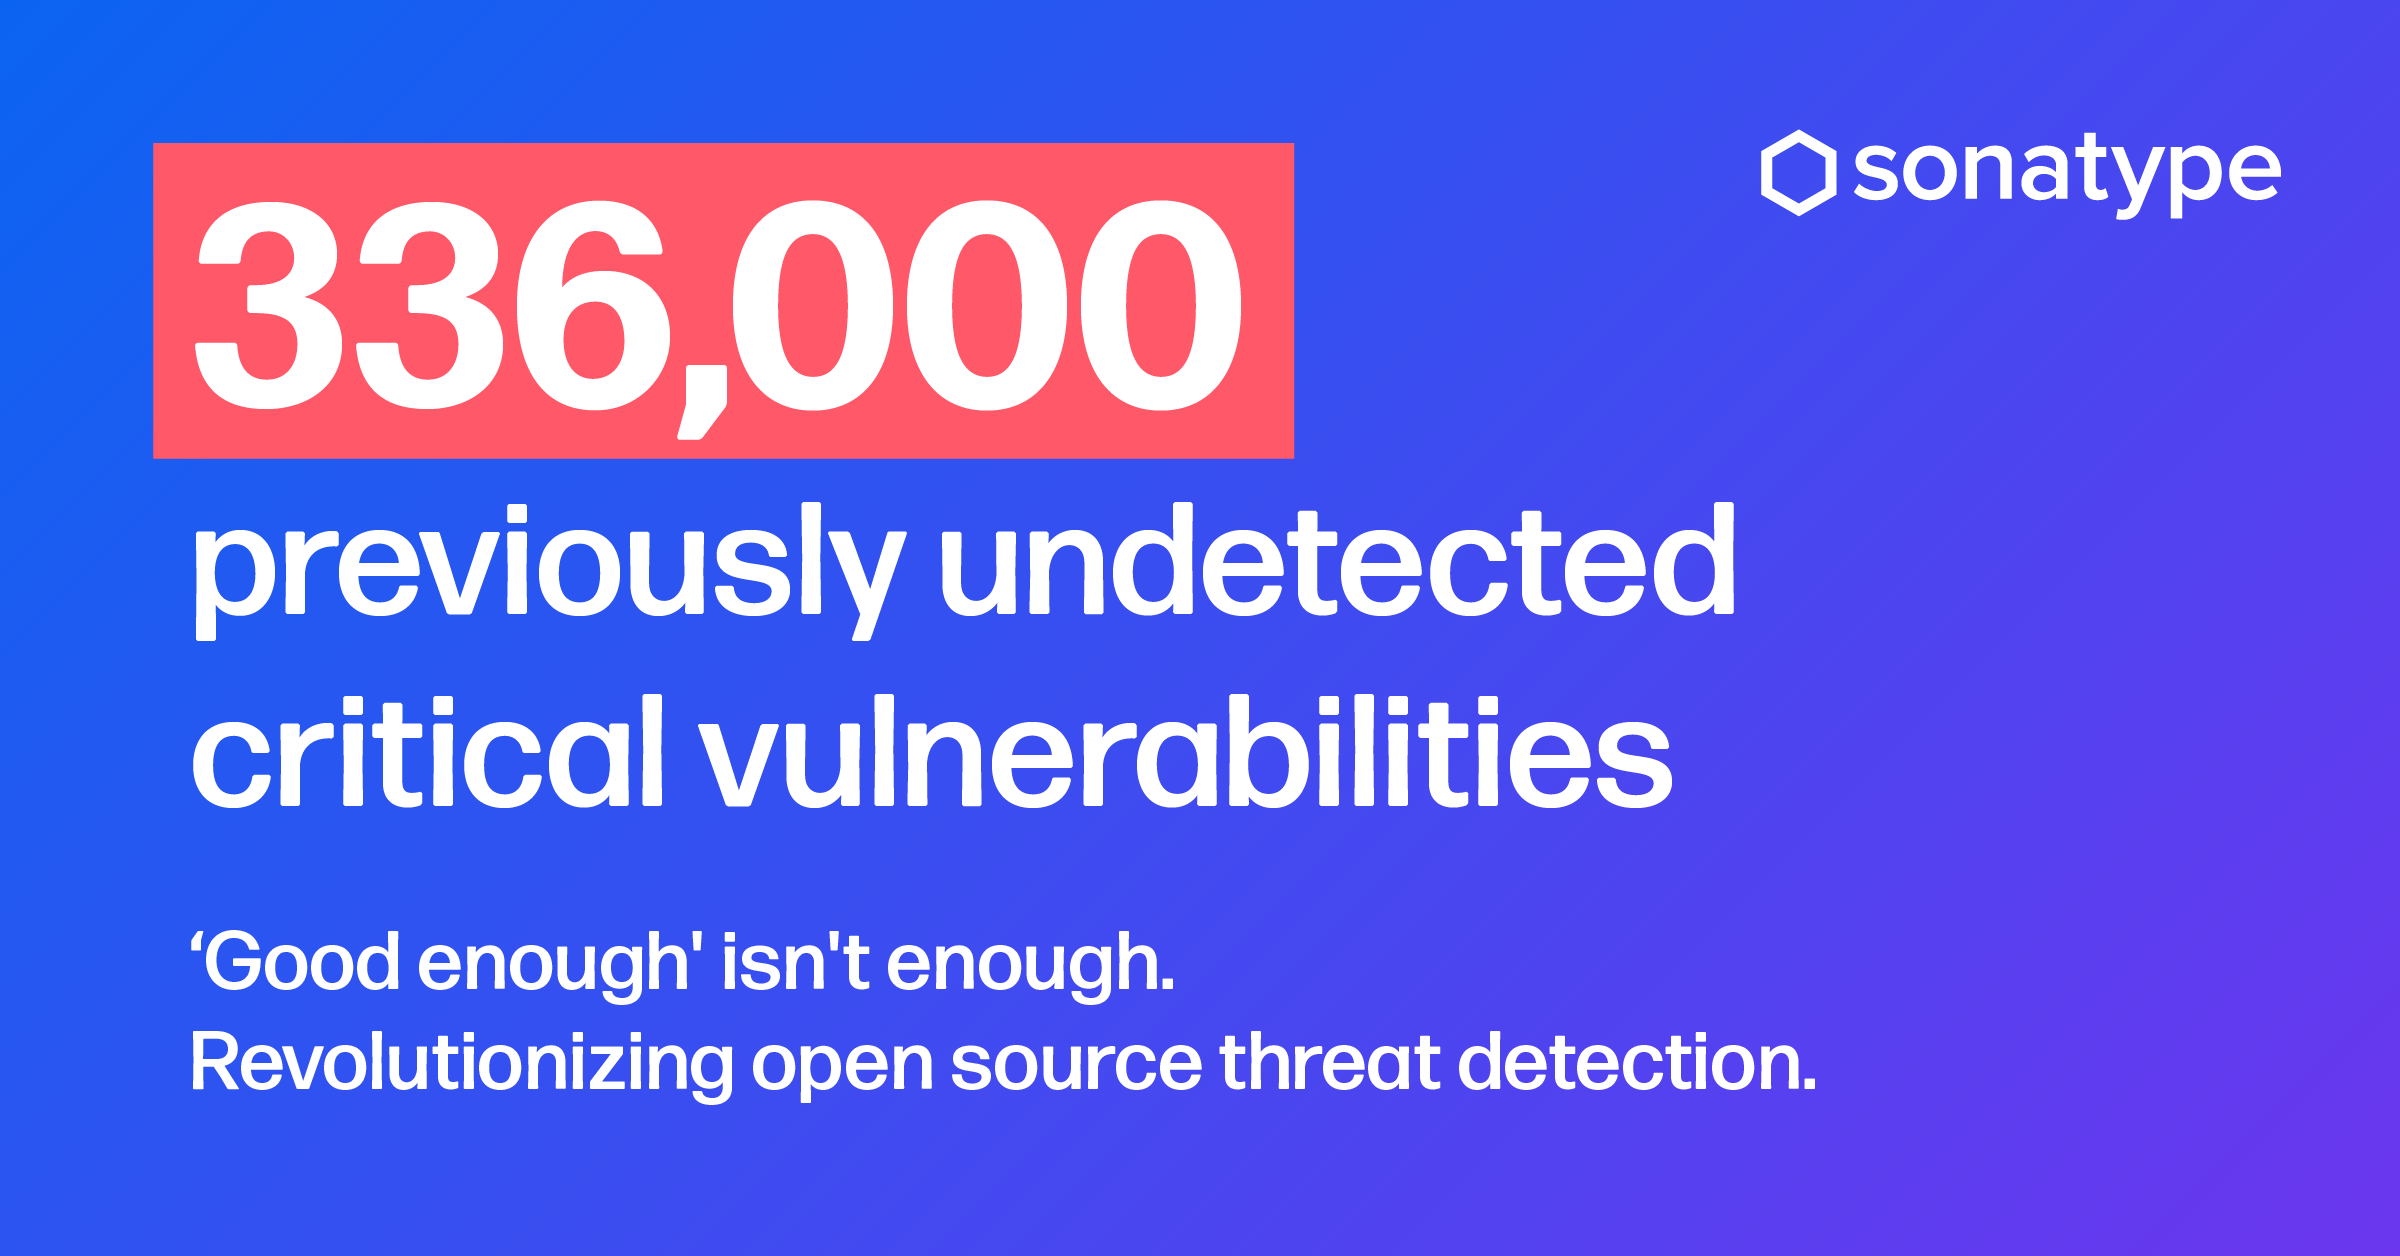 Sonatype, the software supply chain optimization company, today announced it has identified 336,000 previously undetectable, “Critical” open source vulnerabilities through a new, first-of-its-kind shaded vulnerability detection capability in the Sonatype platform, that revolutionizes the identification of hidden security threats within open source code.